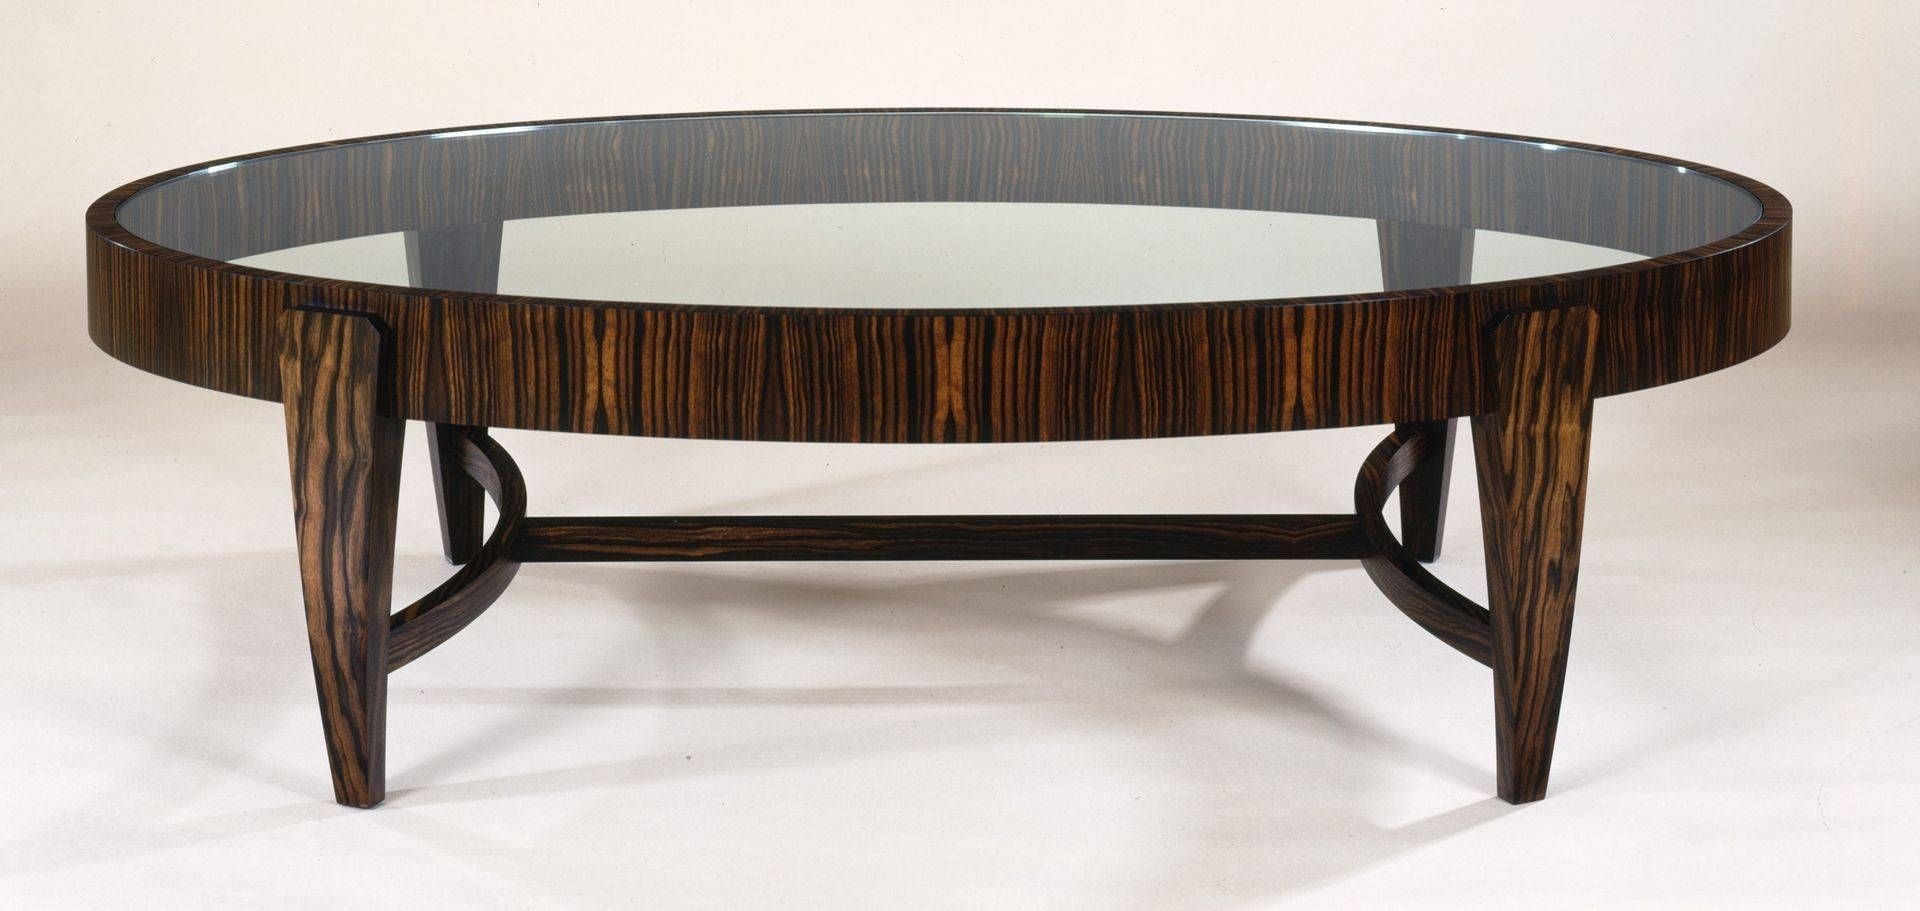 Wood Oval Coffee Table : Axiomaticaorg – Jericho Mafjar Project Intended For Oval Wood Coffee Tables (View 21 of 30)